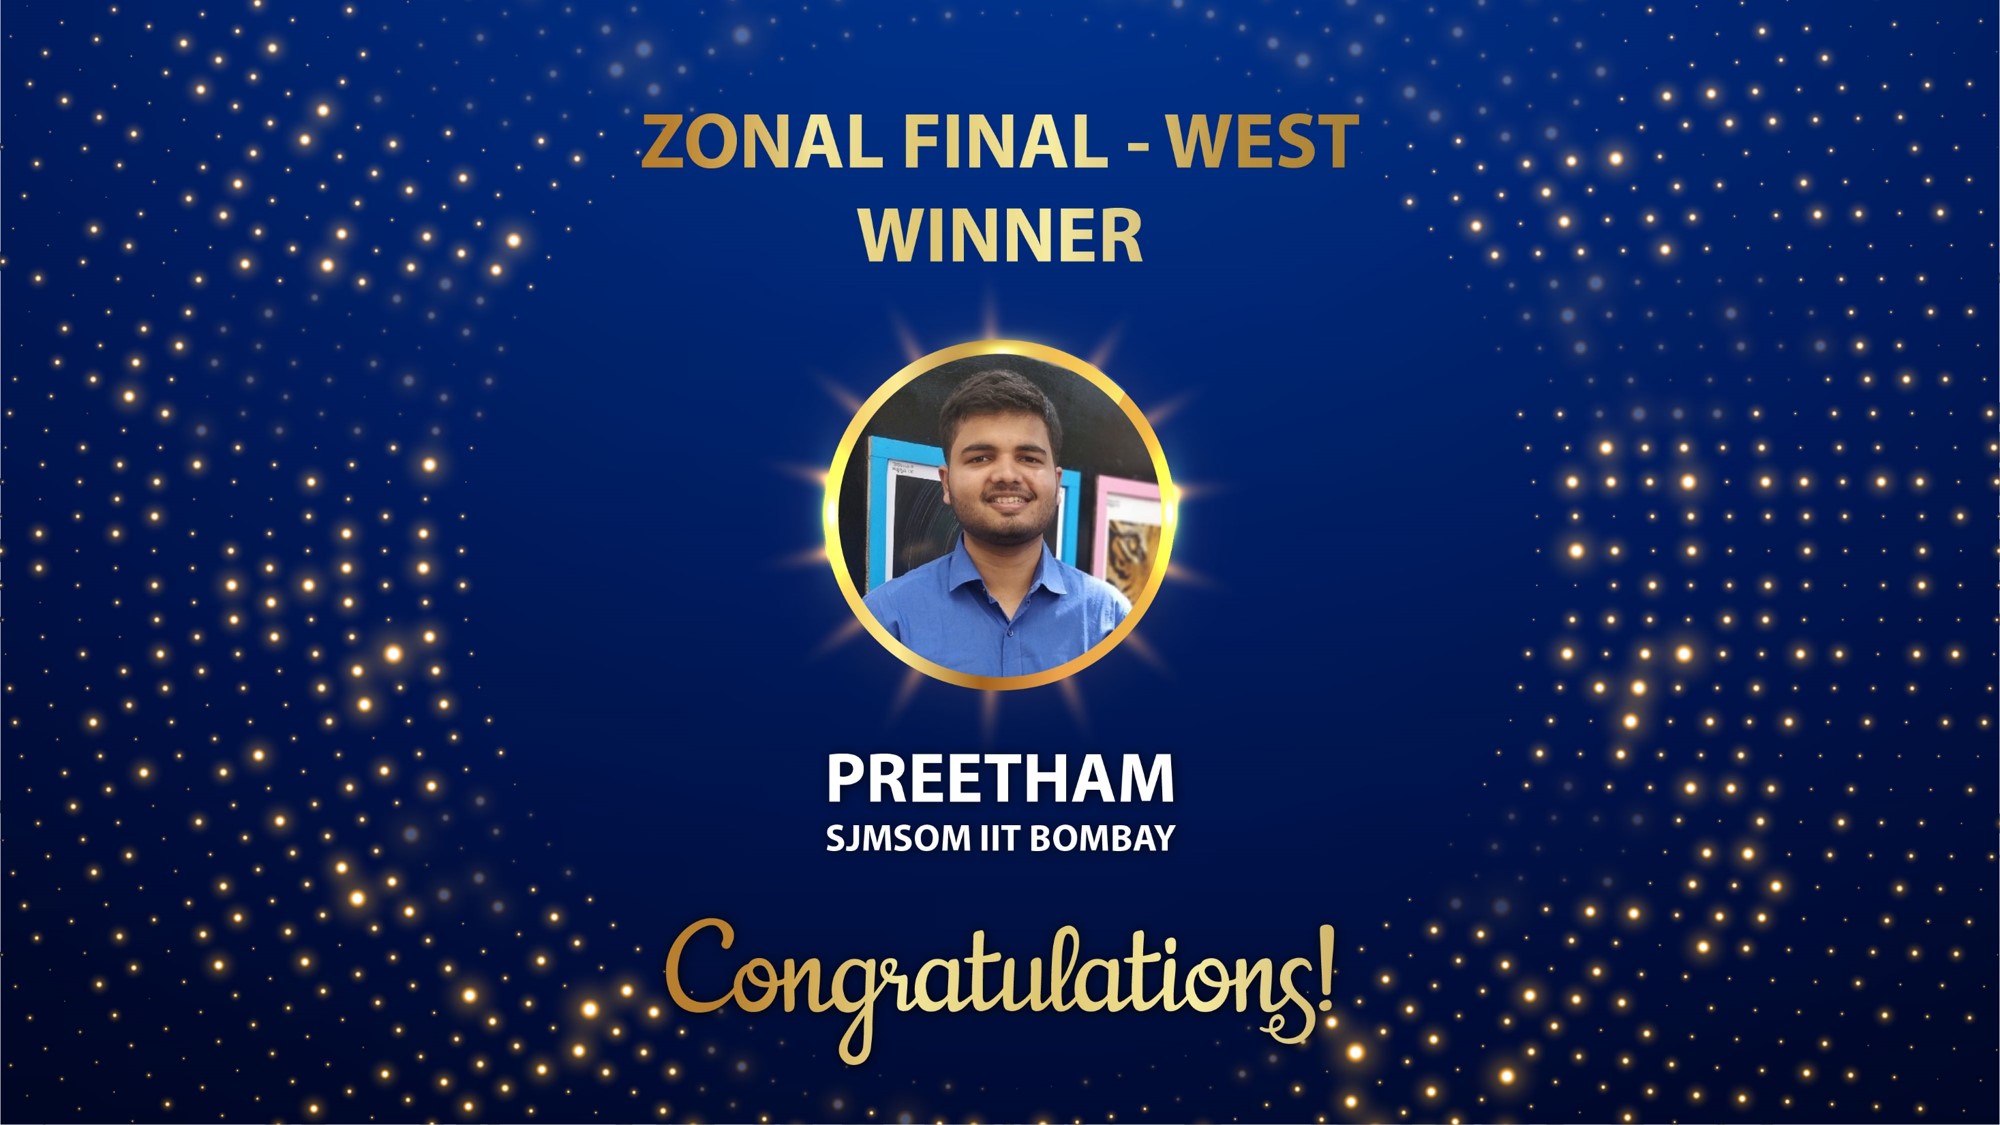 Student from SJMSOM IIT Bombay wins a spot in the National finals!